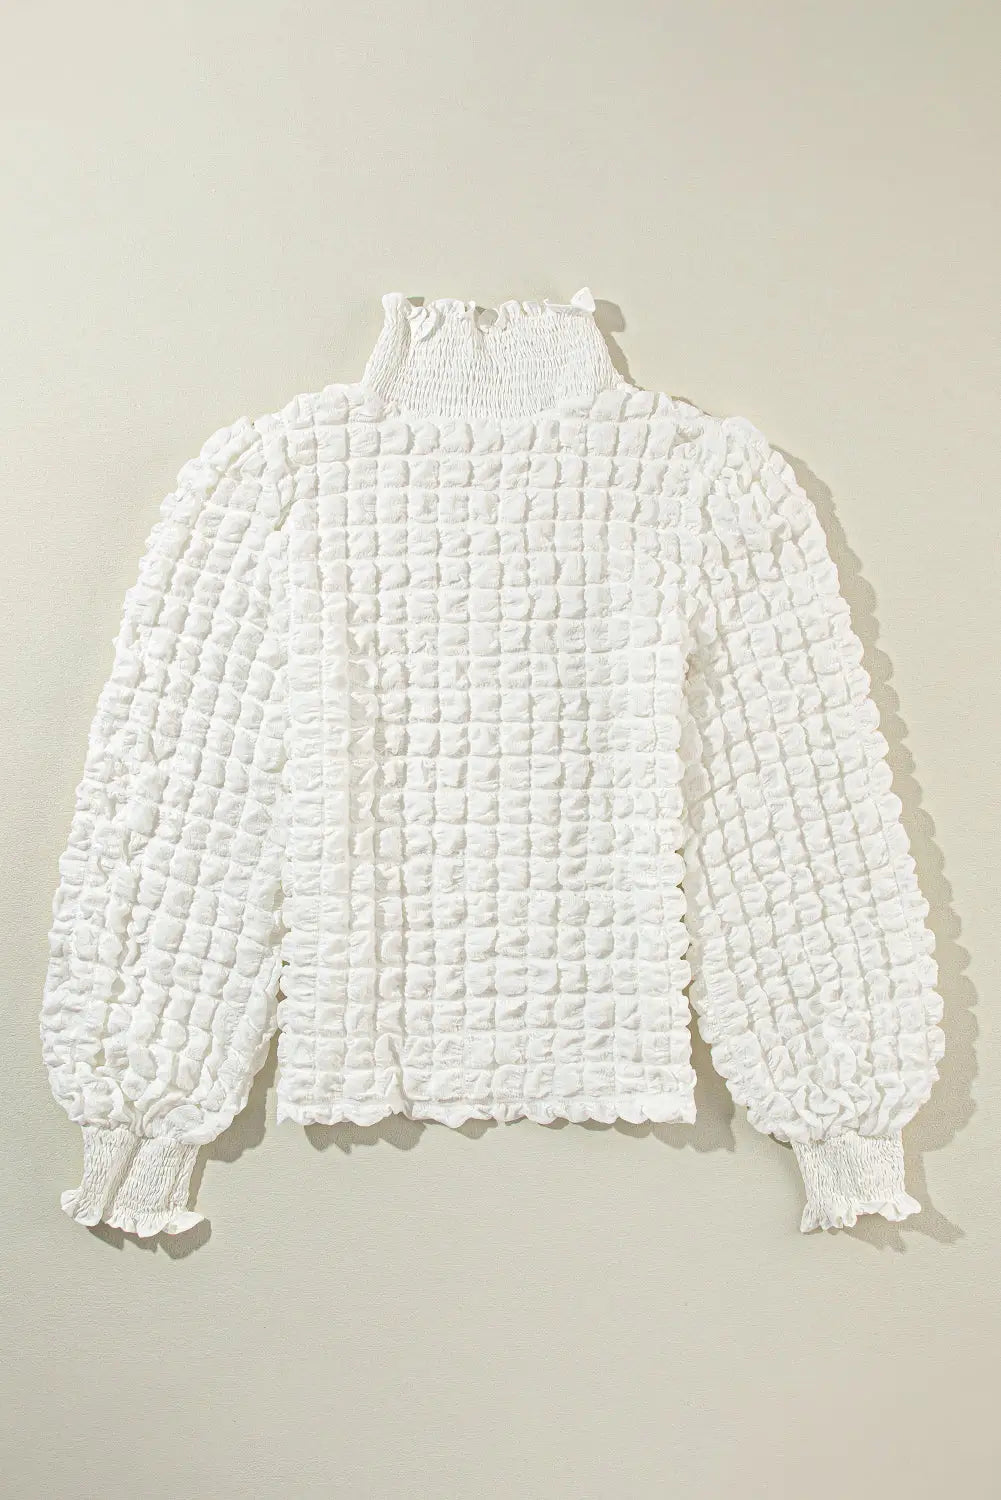 Rose bubble textured waffle hoodie - tops